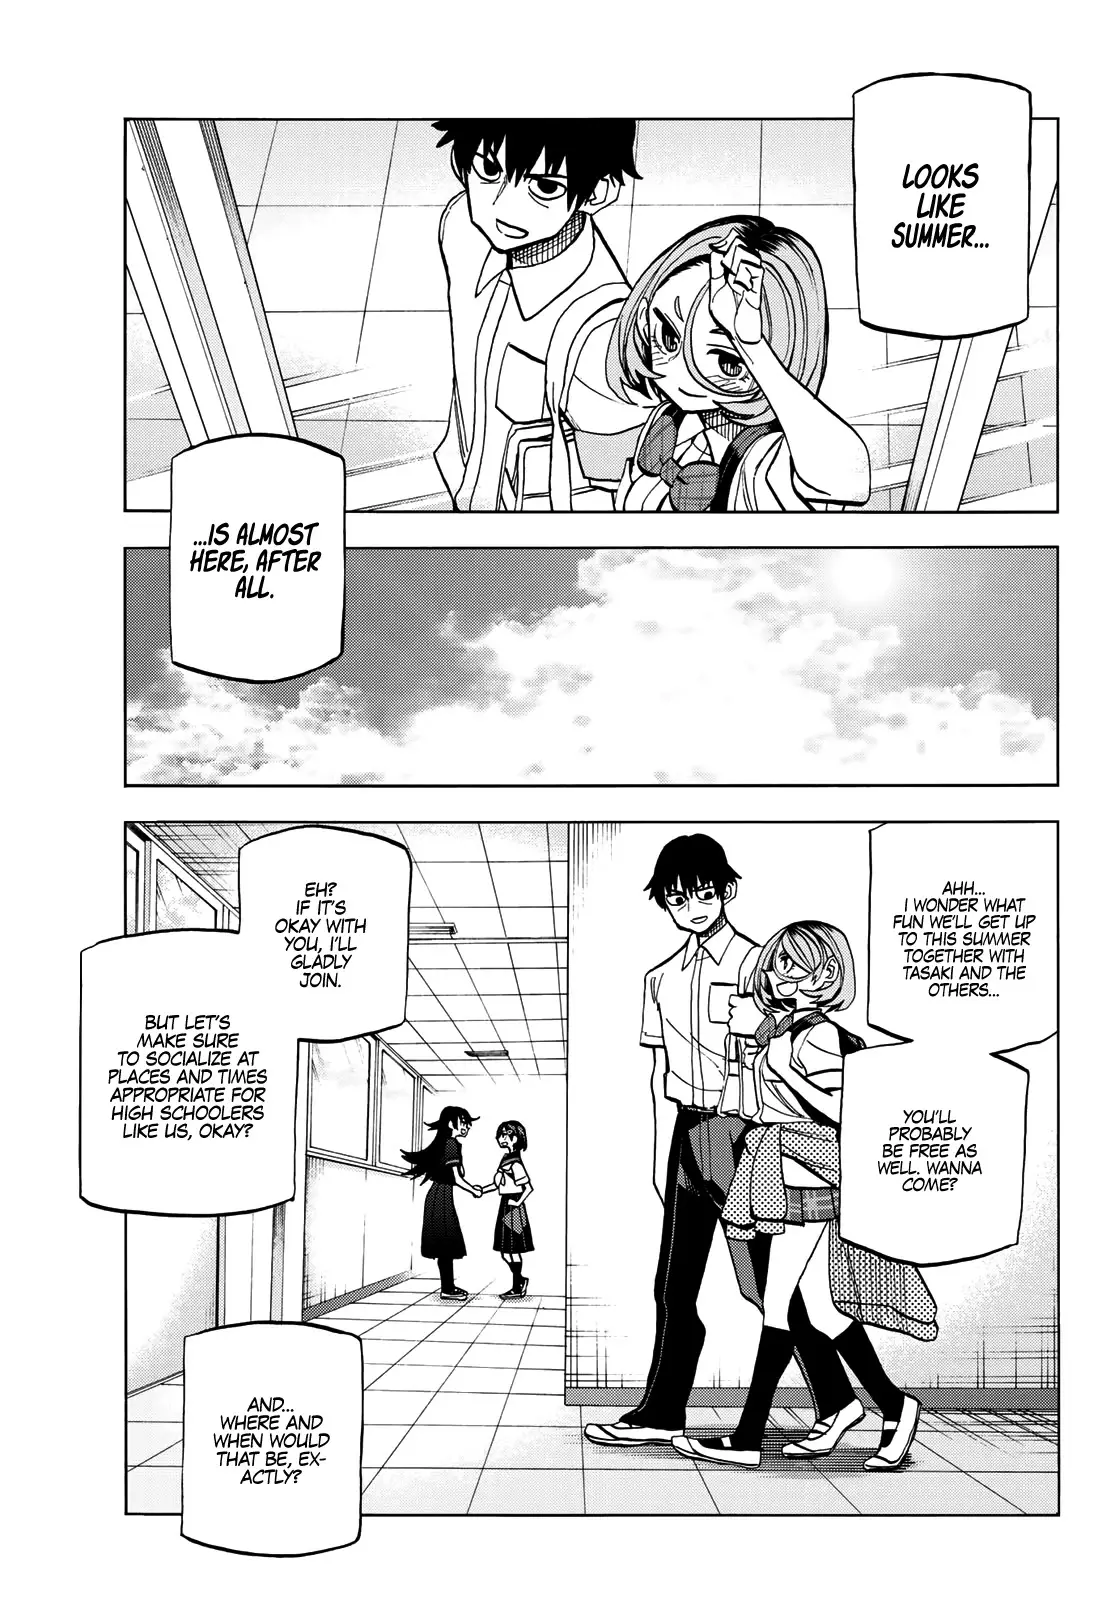 The Story Between A Dumb Prefect And A High School Girl With An Inappropriate Skirt Length - 12 page 22